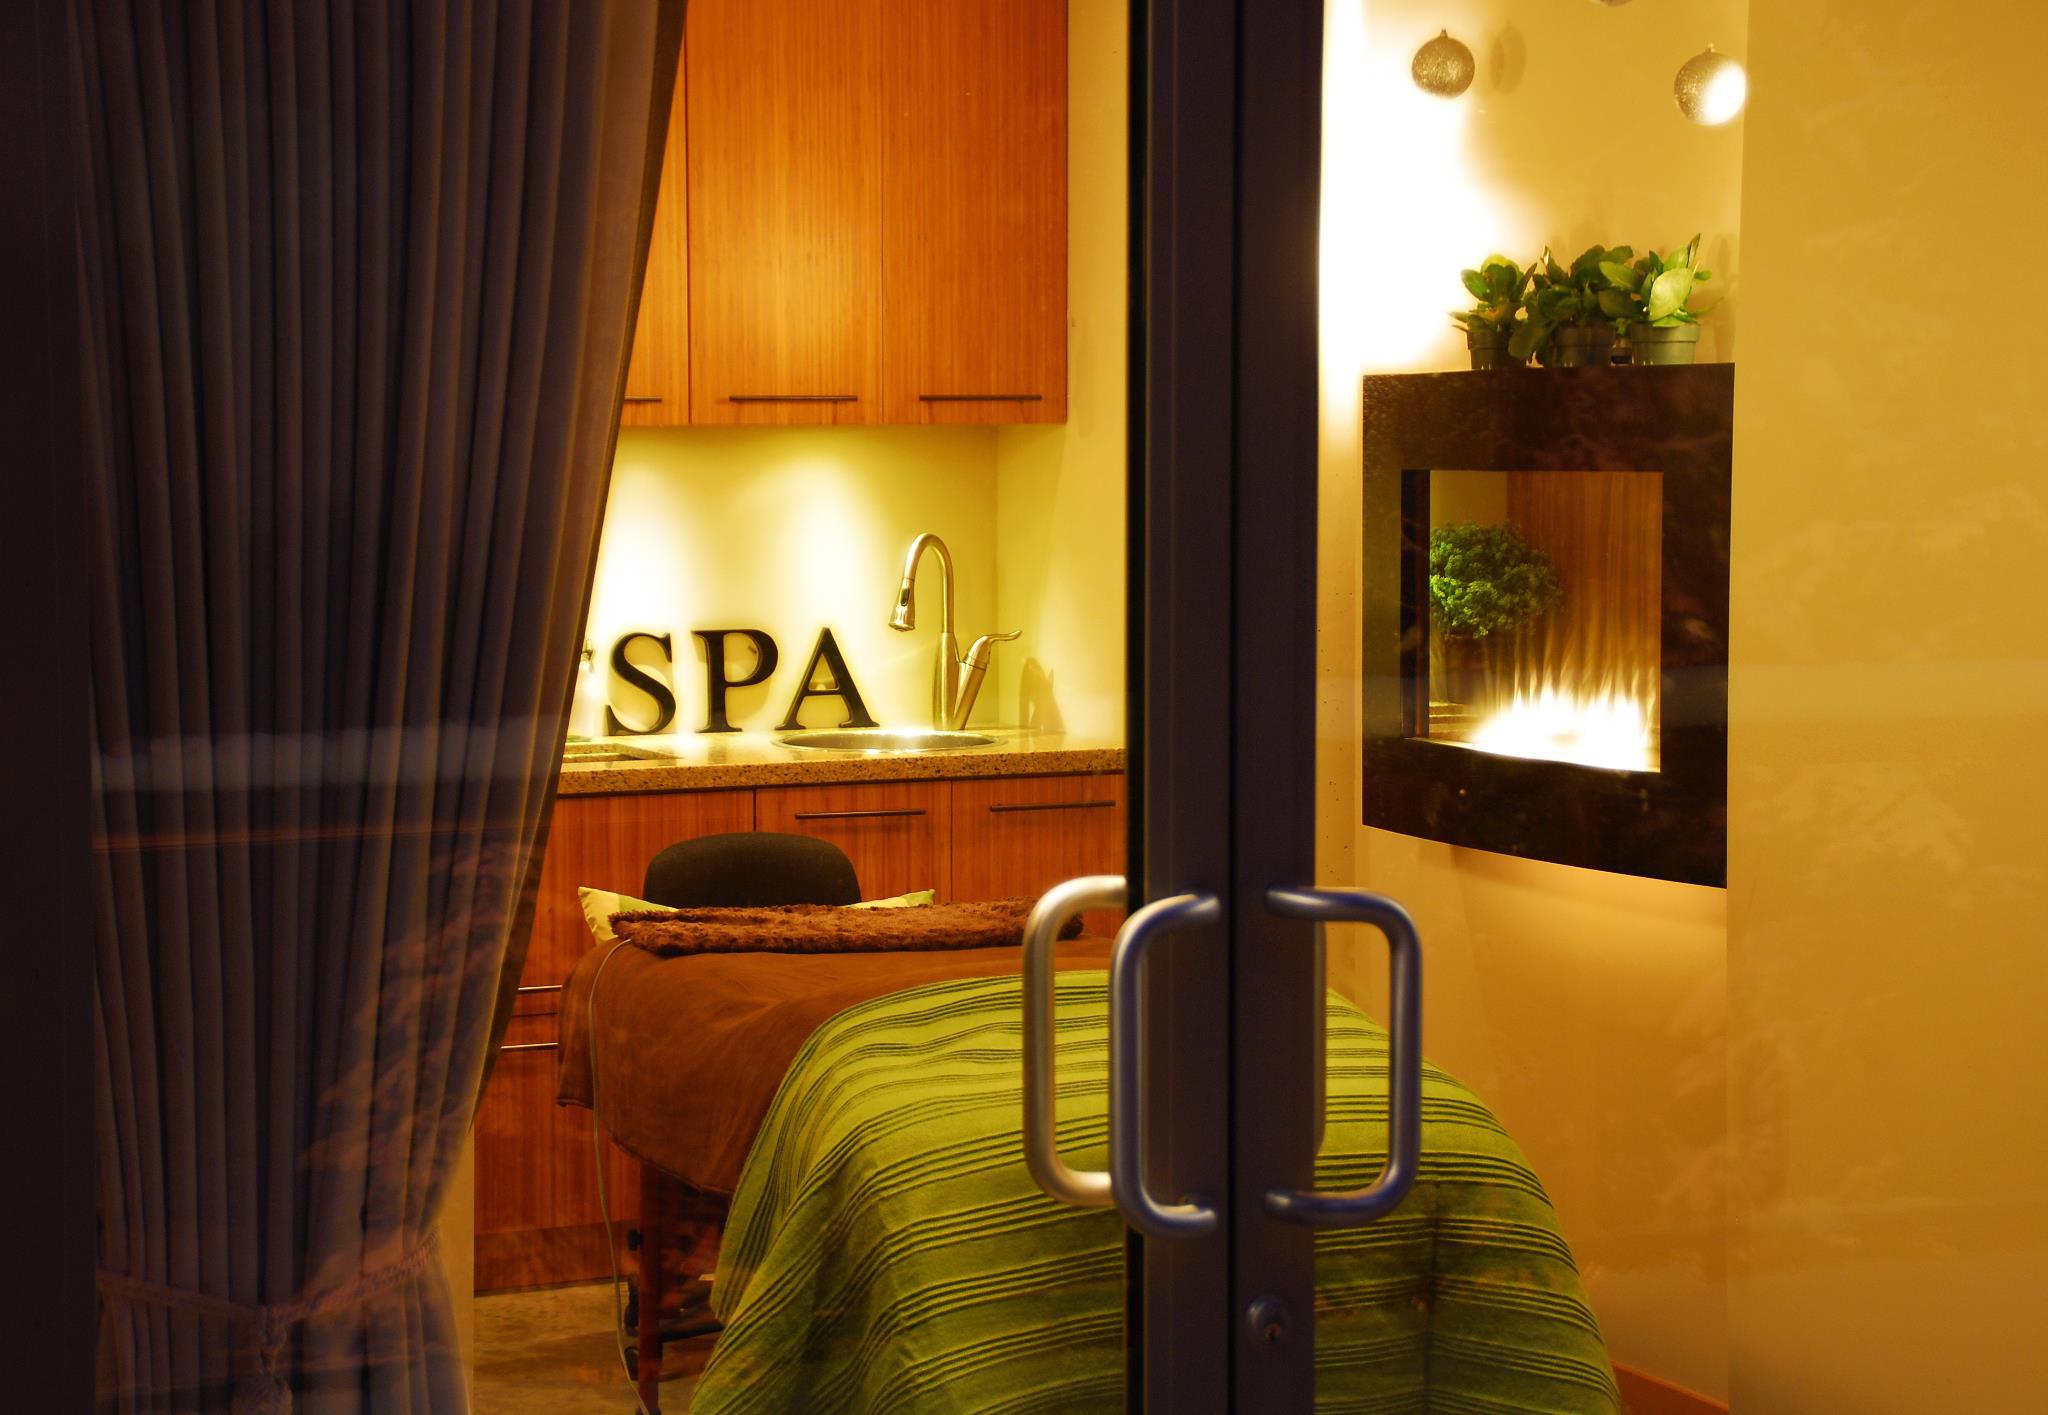 Sun Peaks in-spa or mobile Massage Services